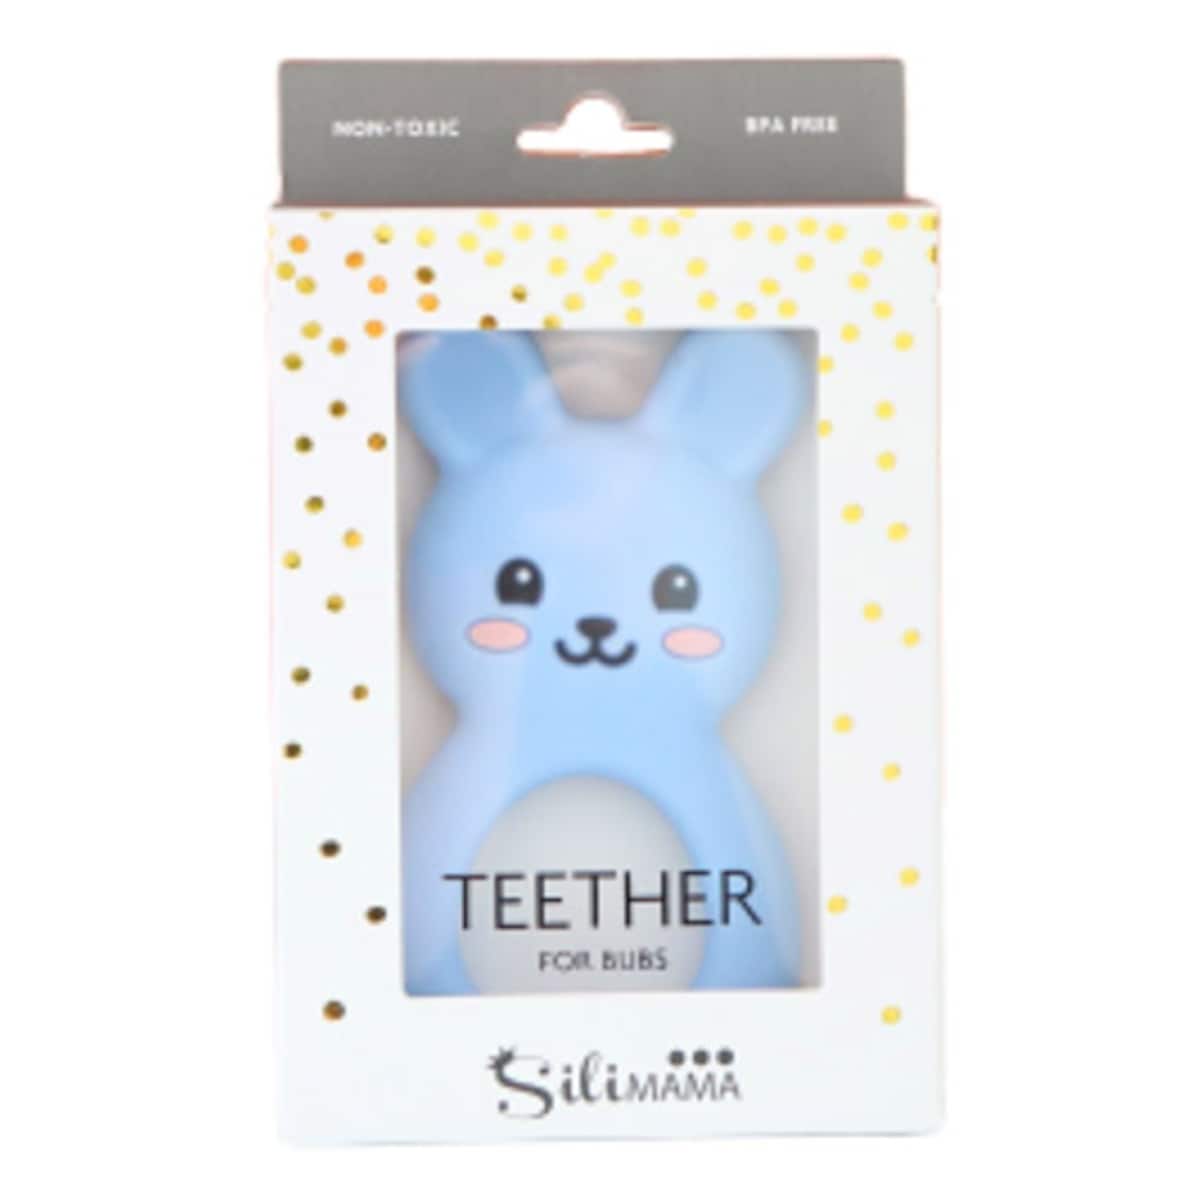 Jellystone Designs Jellies Bunny Baby Teether Soft Blue